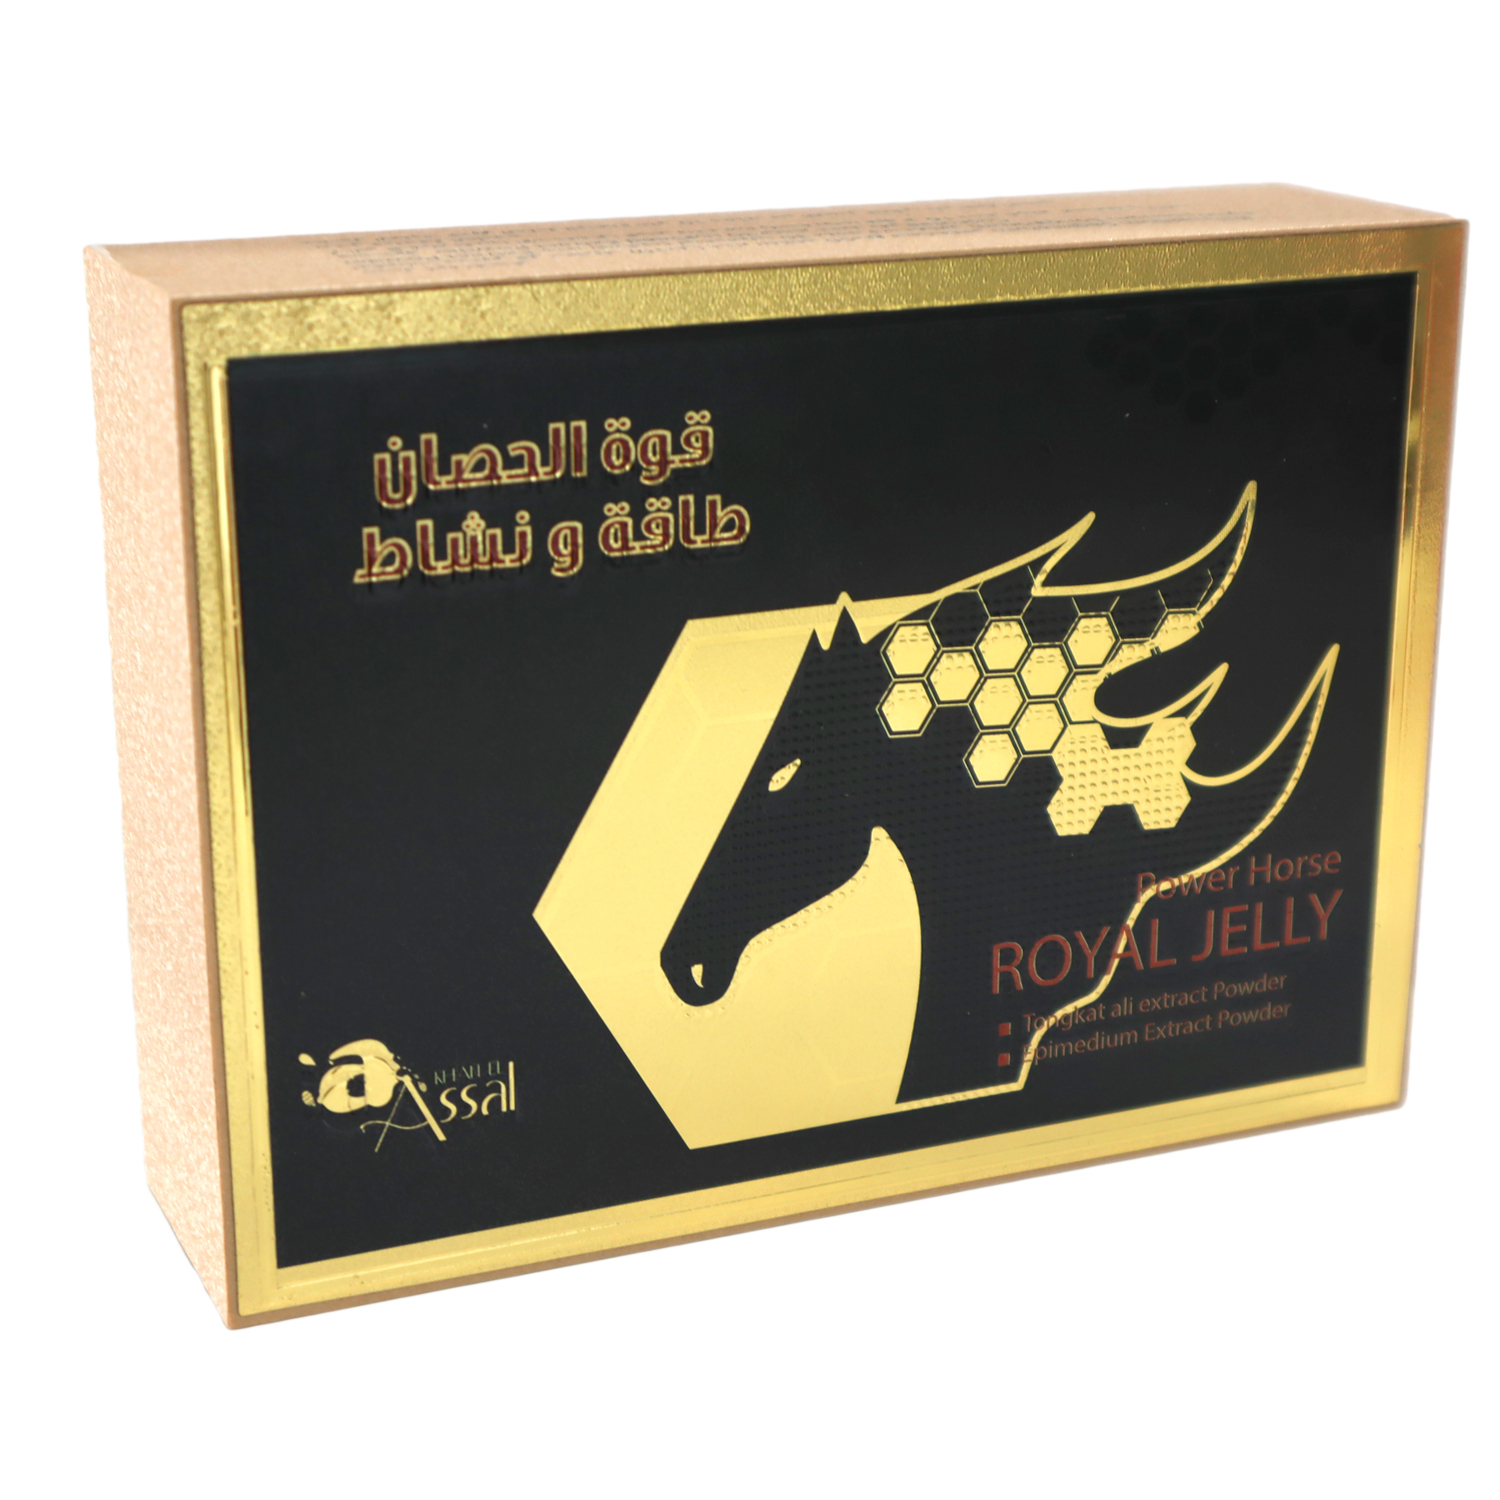 royal jelly horse power black for him